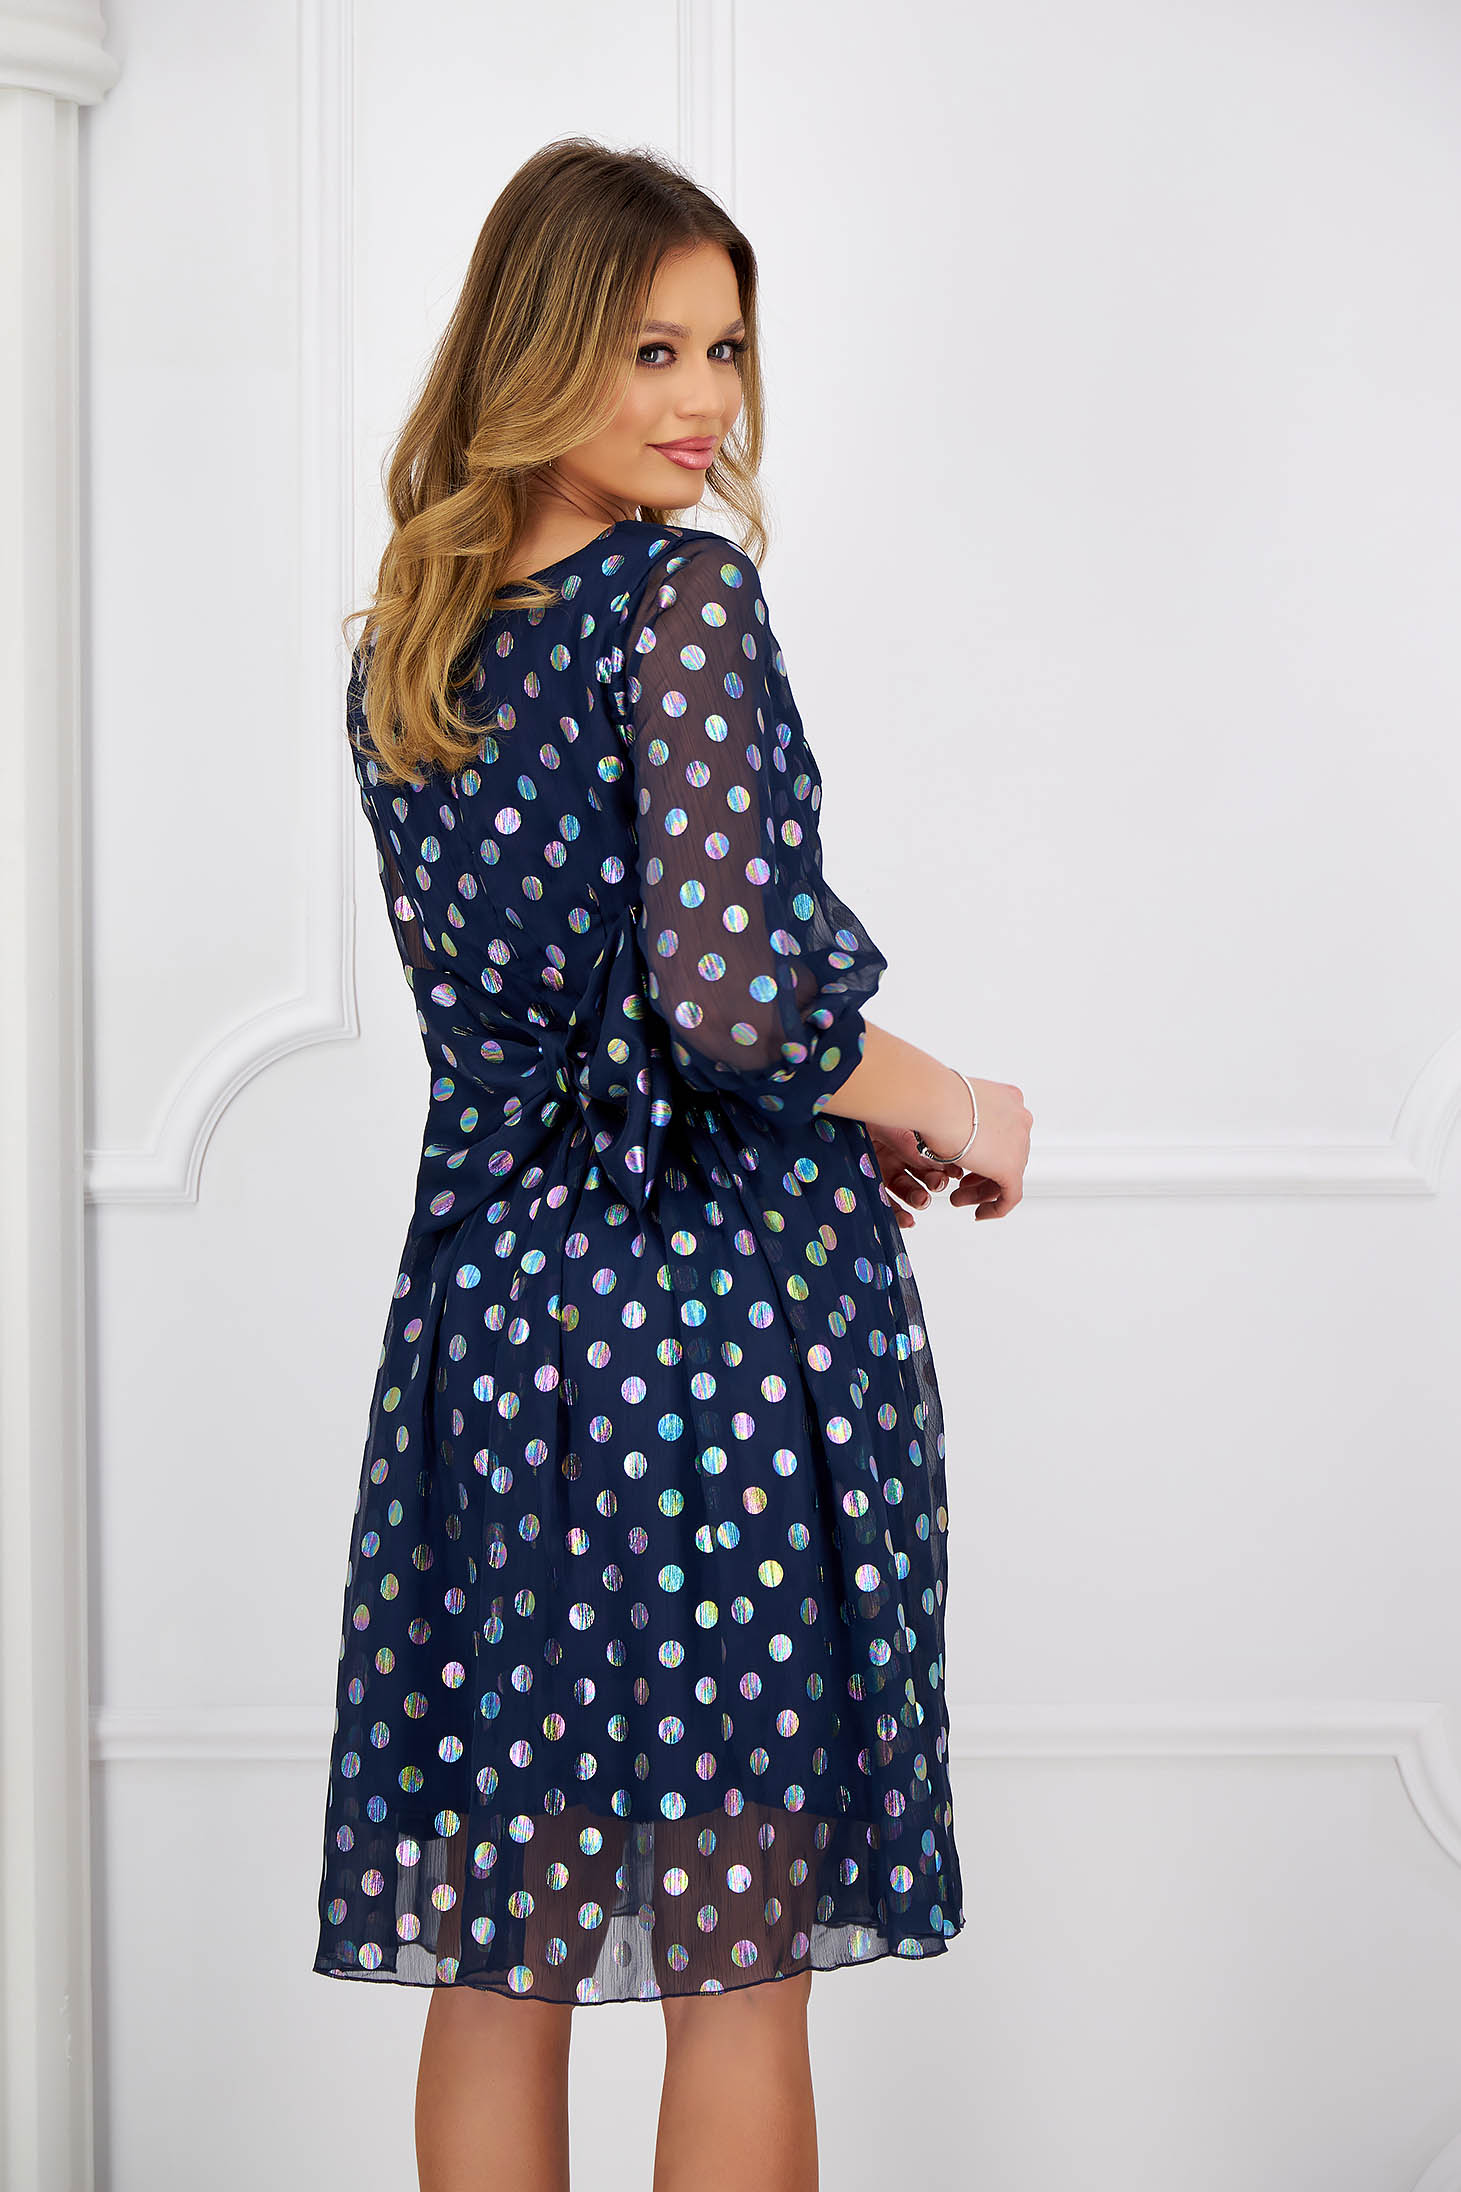 Veil dress in A-line with polka dots accessorized with belt and bow - StarShinerS 2 - StarShinerS.com